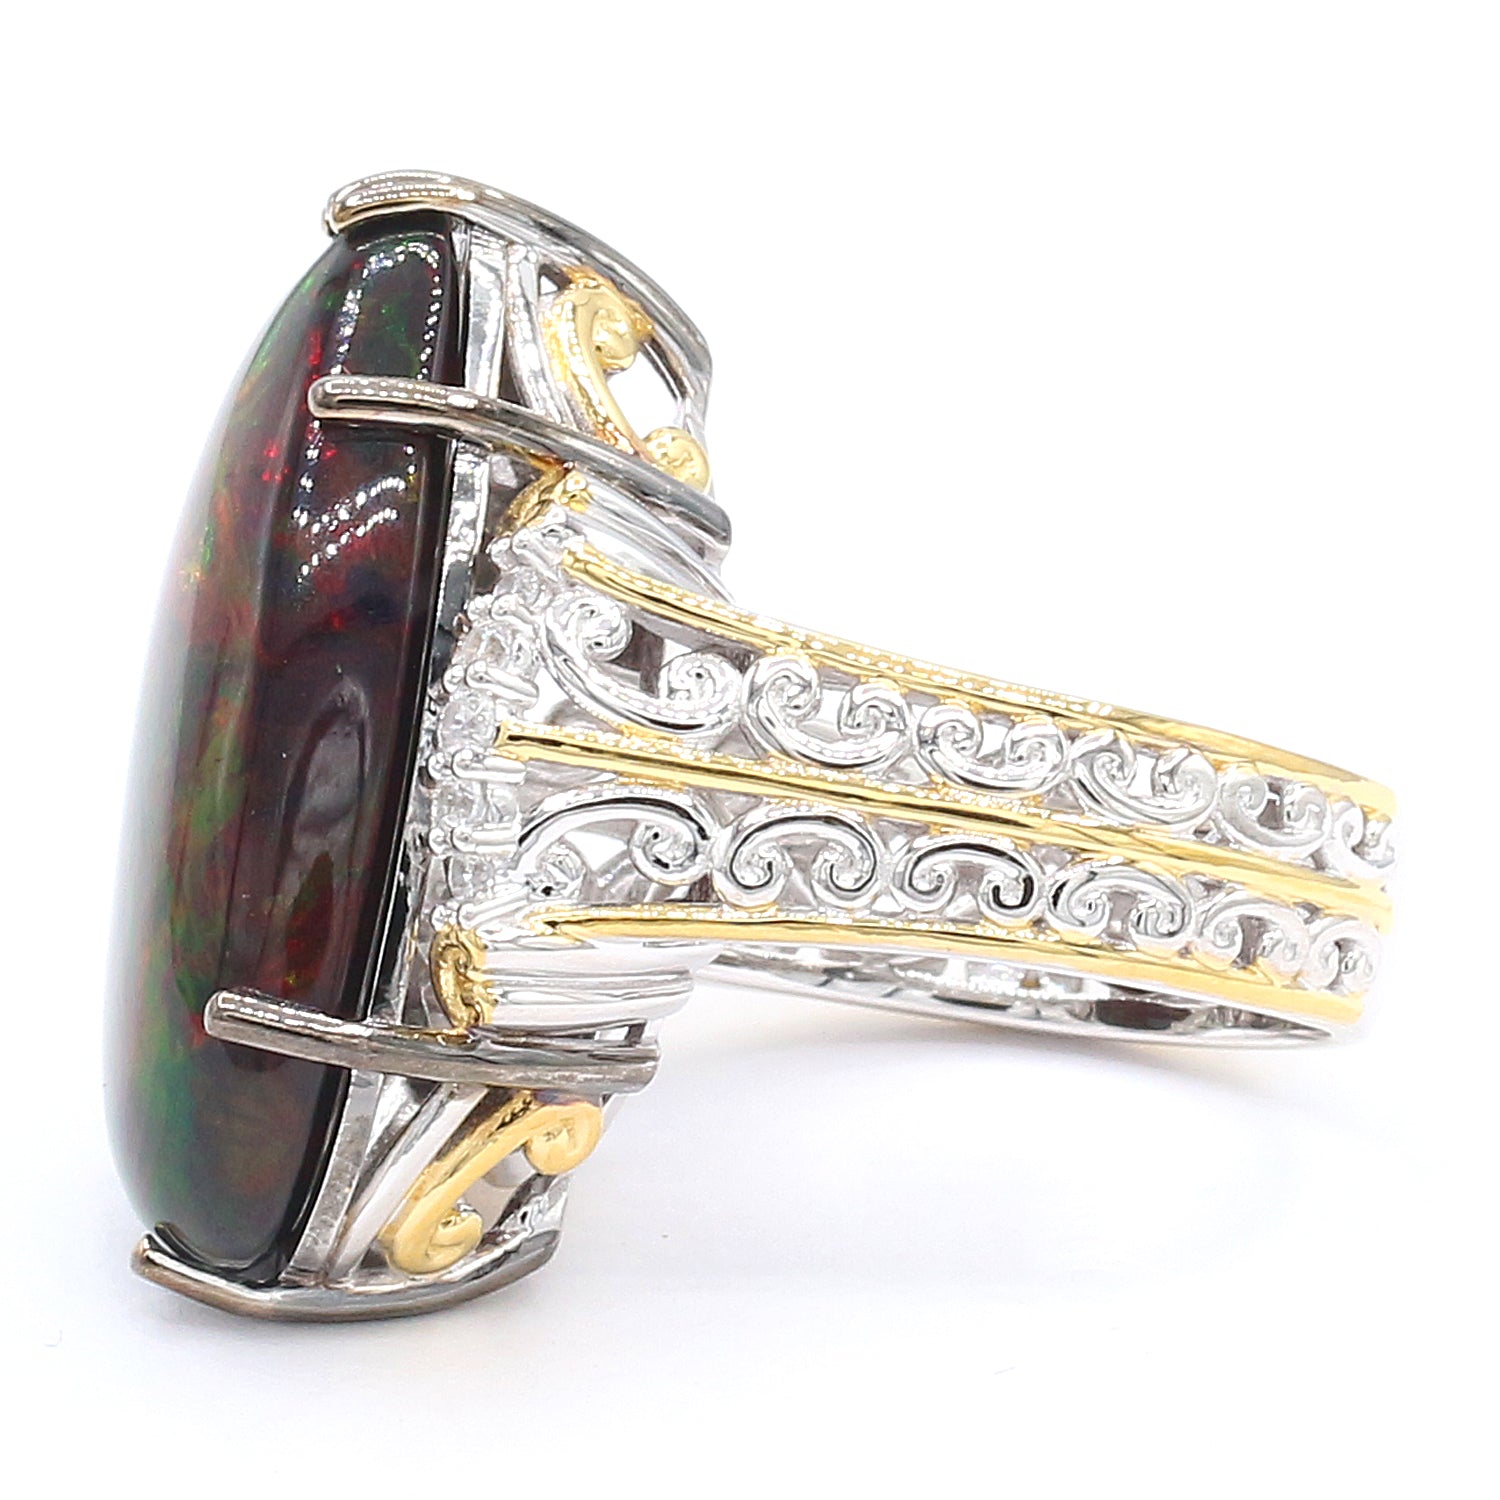 Limited Edition Gems en Vogue Luxe, One-of-a-Kind 14.60ctw Black Ethiopian Opal & White Zircon Ring